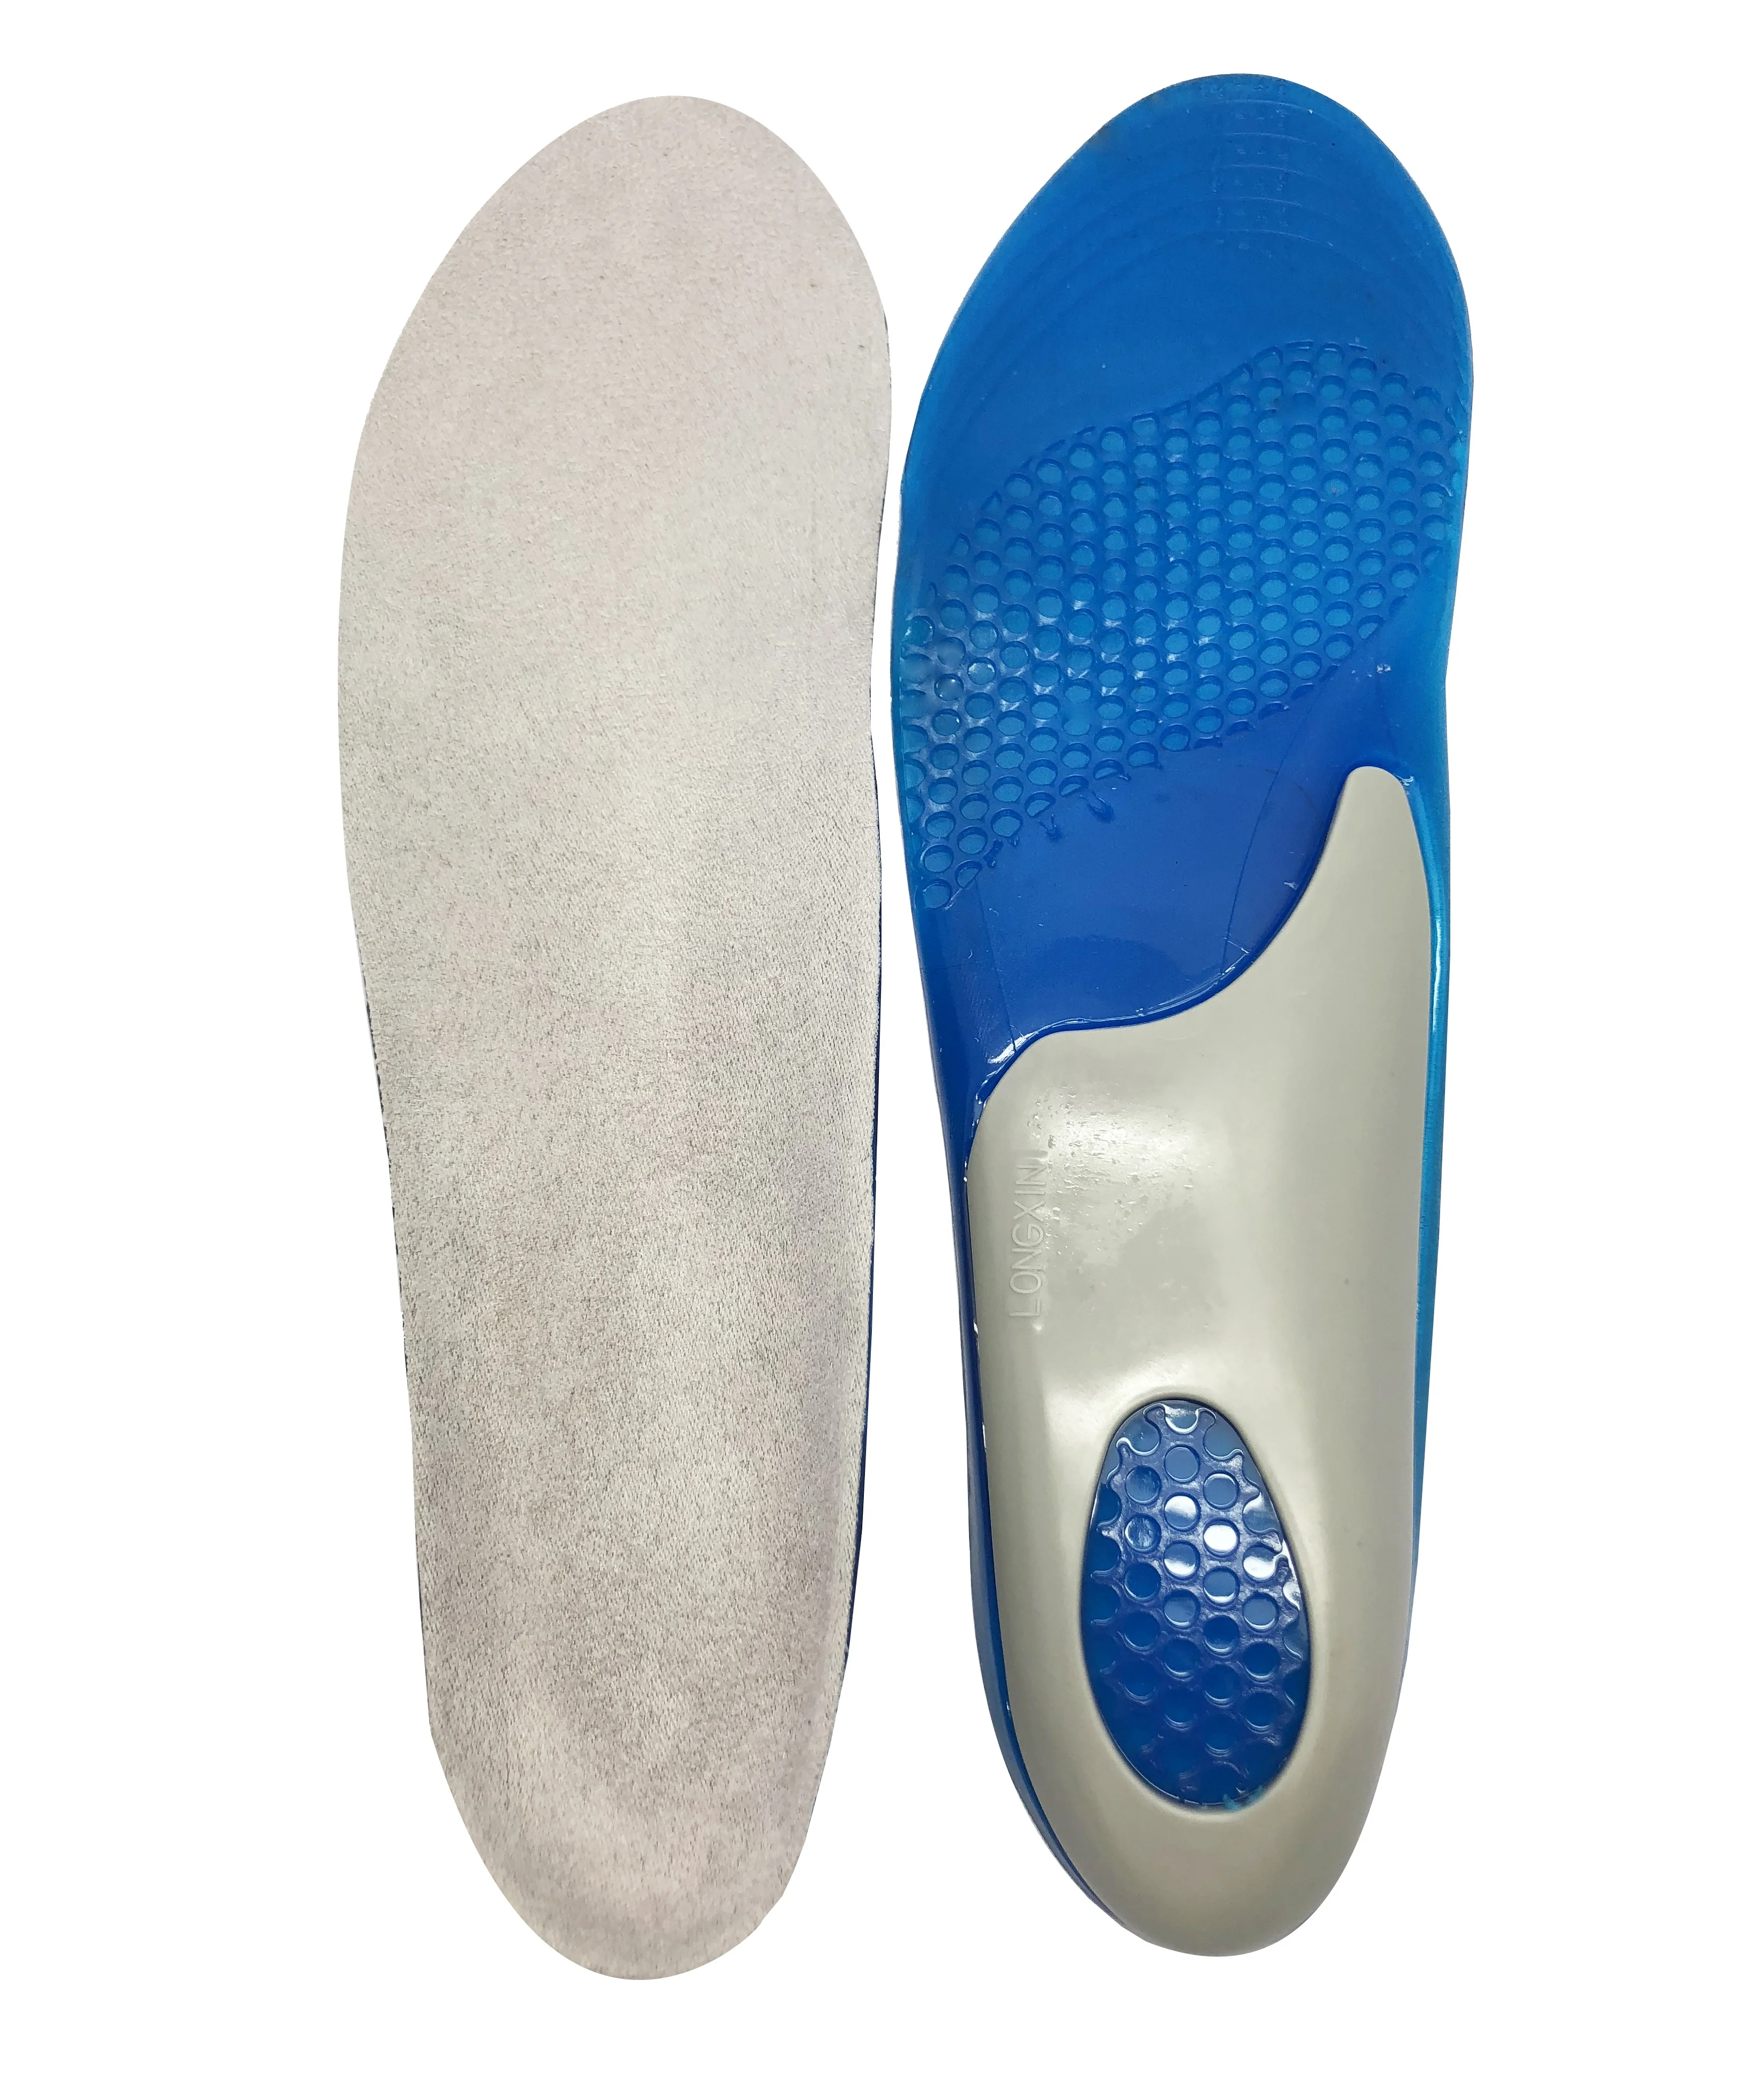 

Factory direct sale military training insole High quality sportsTPE gel insole arch support inner soles sport gel insole, Blue and grey